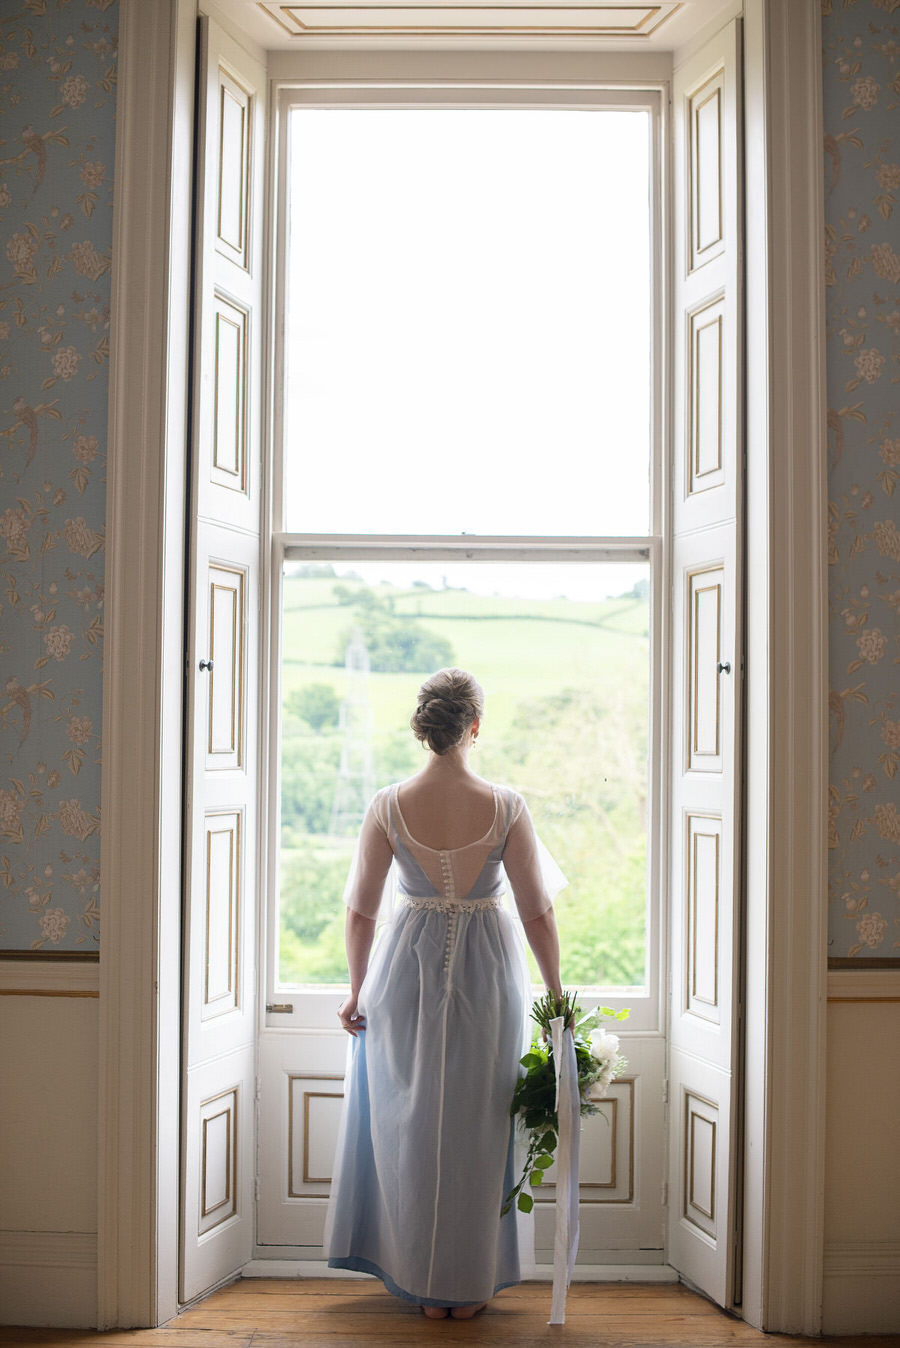 Pynes House wedding styling ideas with Ailsa Munro, Sarah Shuttle and Lottie Ettling PHotography (48)